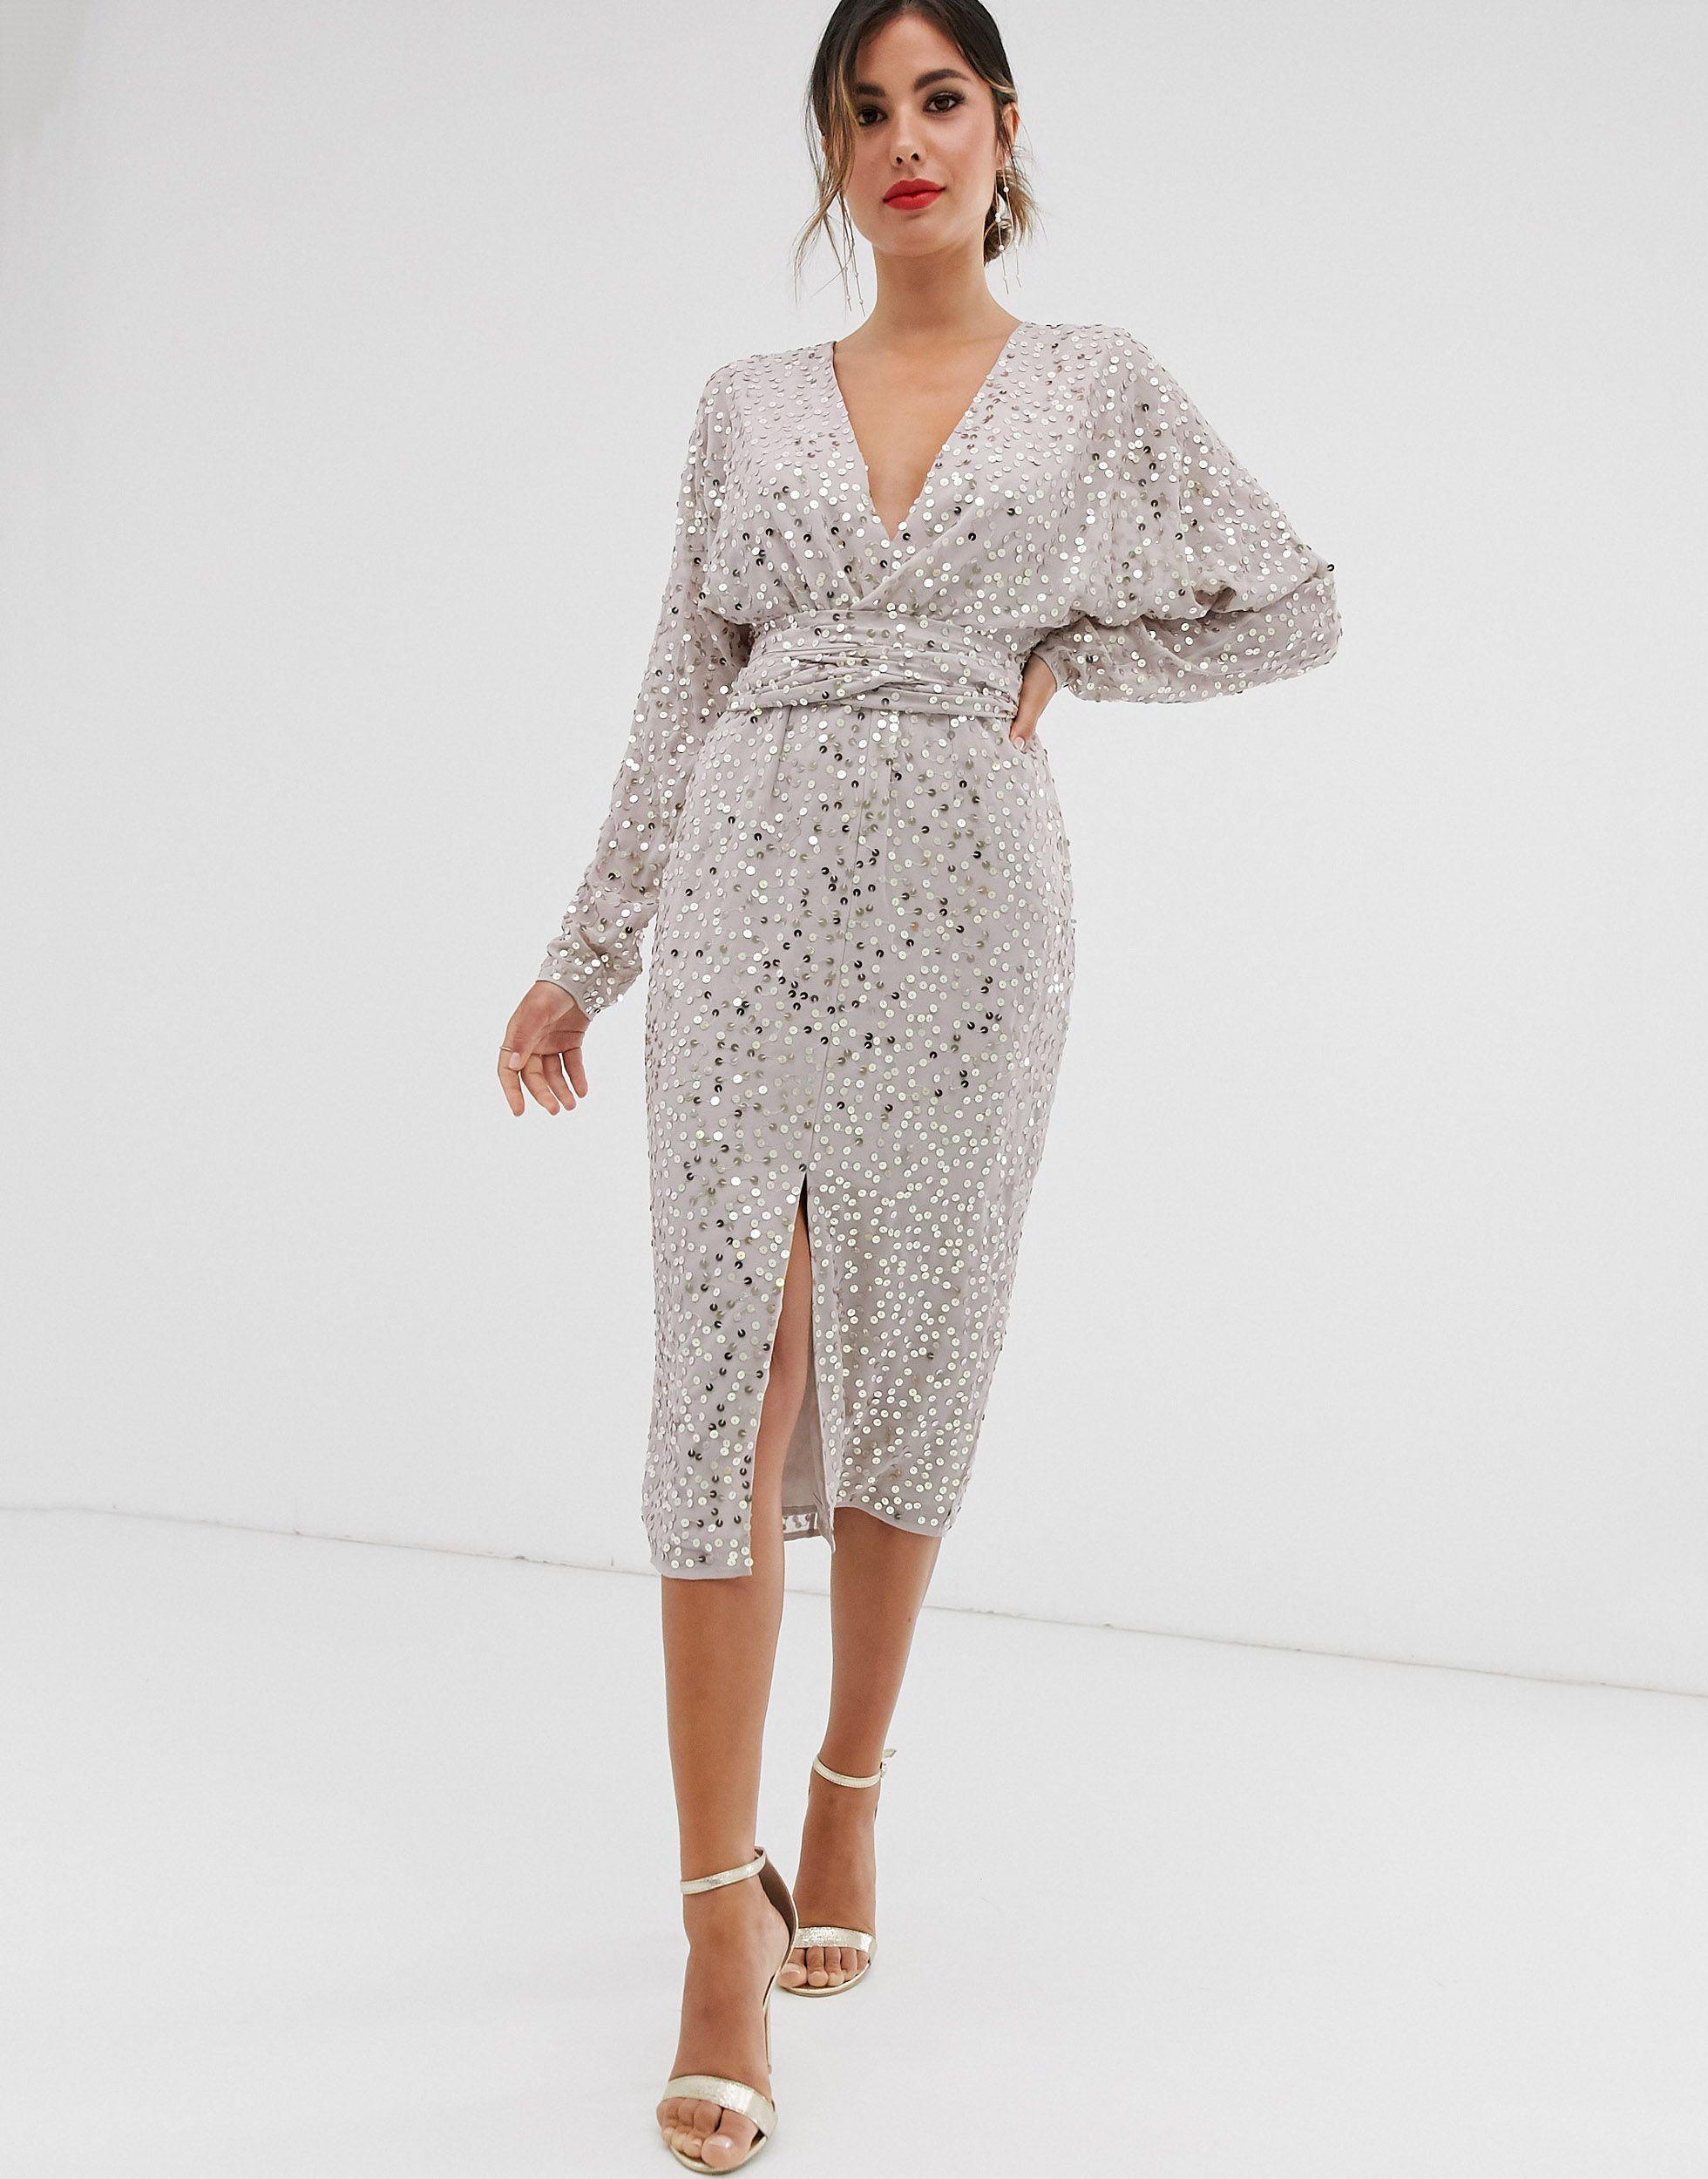 ASOS Synthetic Midi Dress With Batwing ...